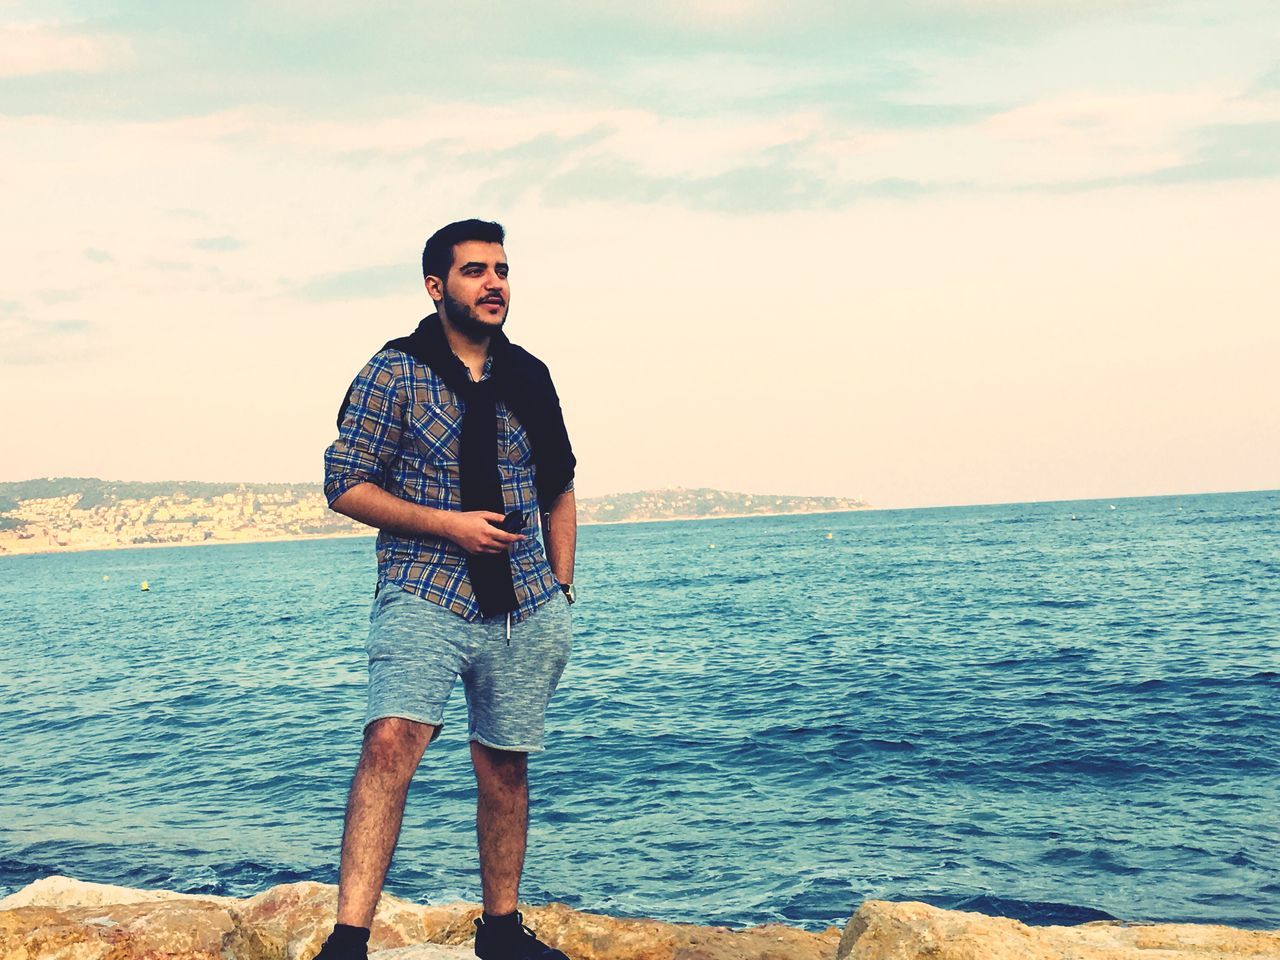 sea, horizon over water, standing, real people, water, one person, nature, sky, casual clothing, looking at camera, front view, leisure activity, outdoors, scenics, portrait, lifestyles, beauty in nature, tranquil scene, young men, full length, young adult, cloud - sky, smiling, day